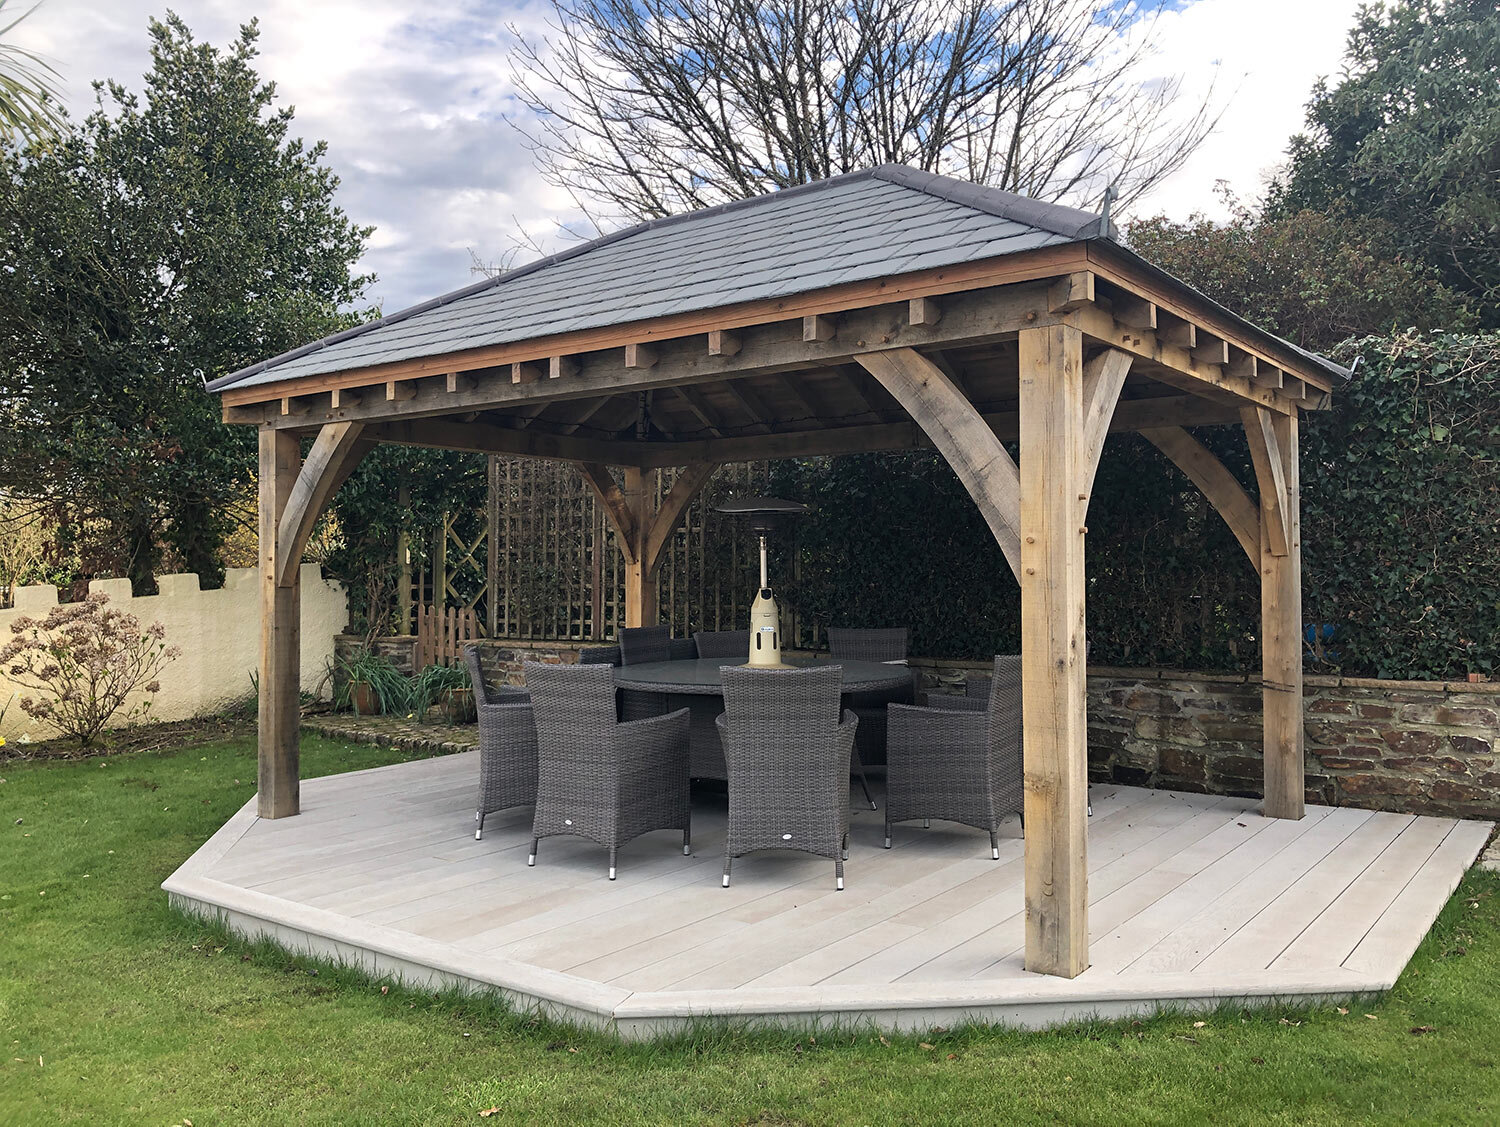 Oak framed outdoor living and dining area with Millboard deck